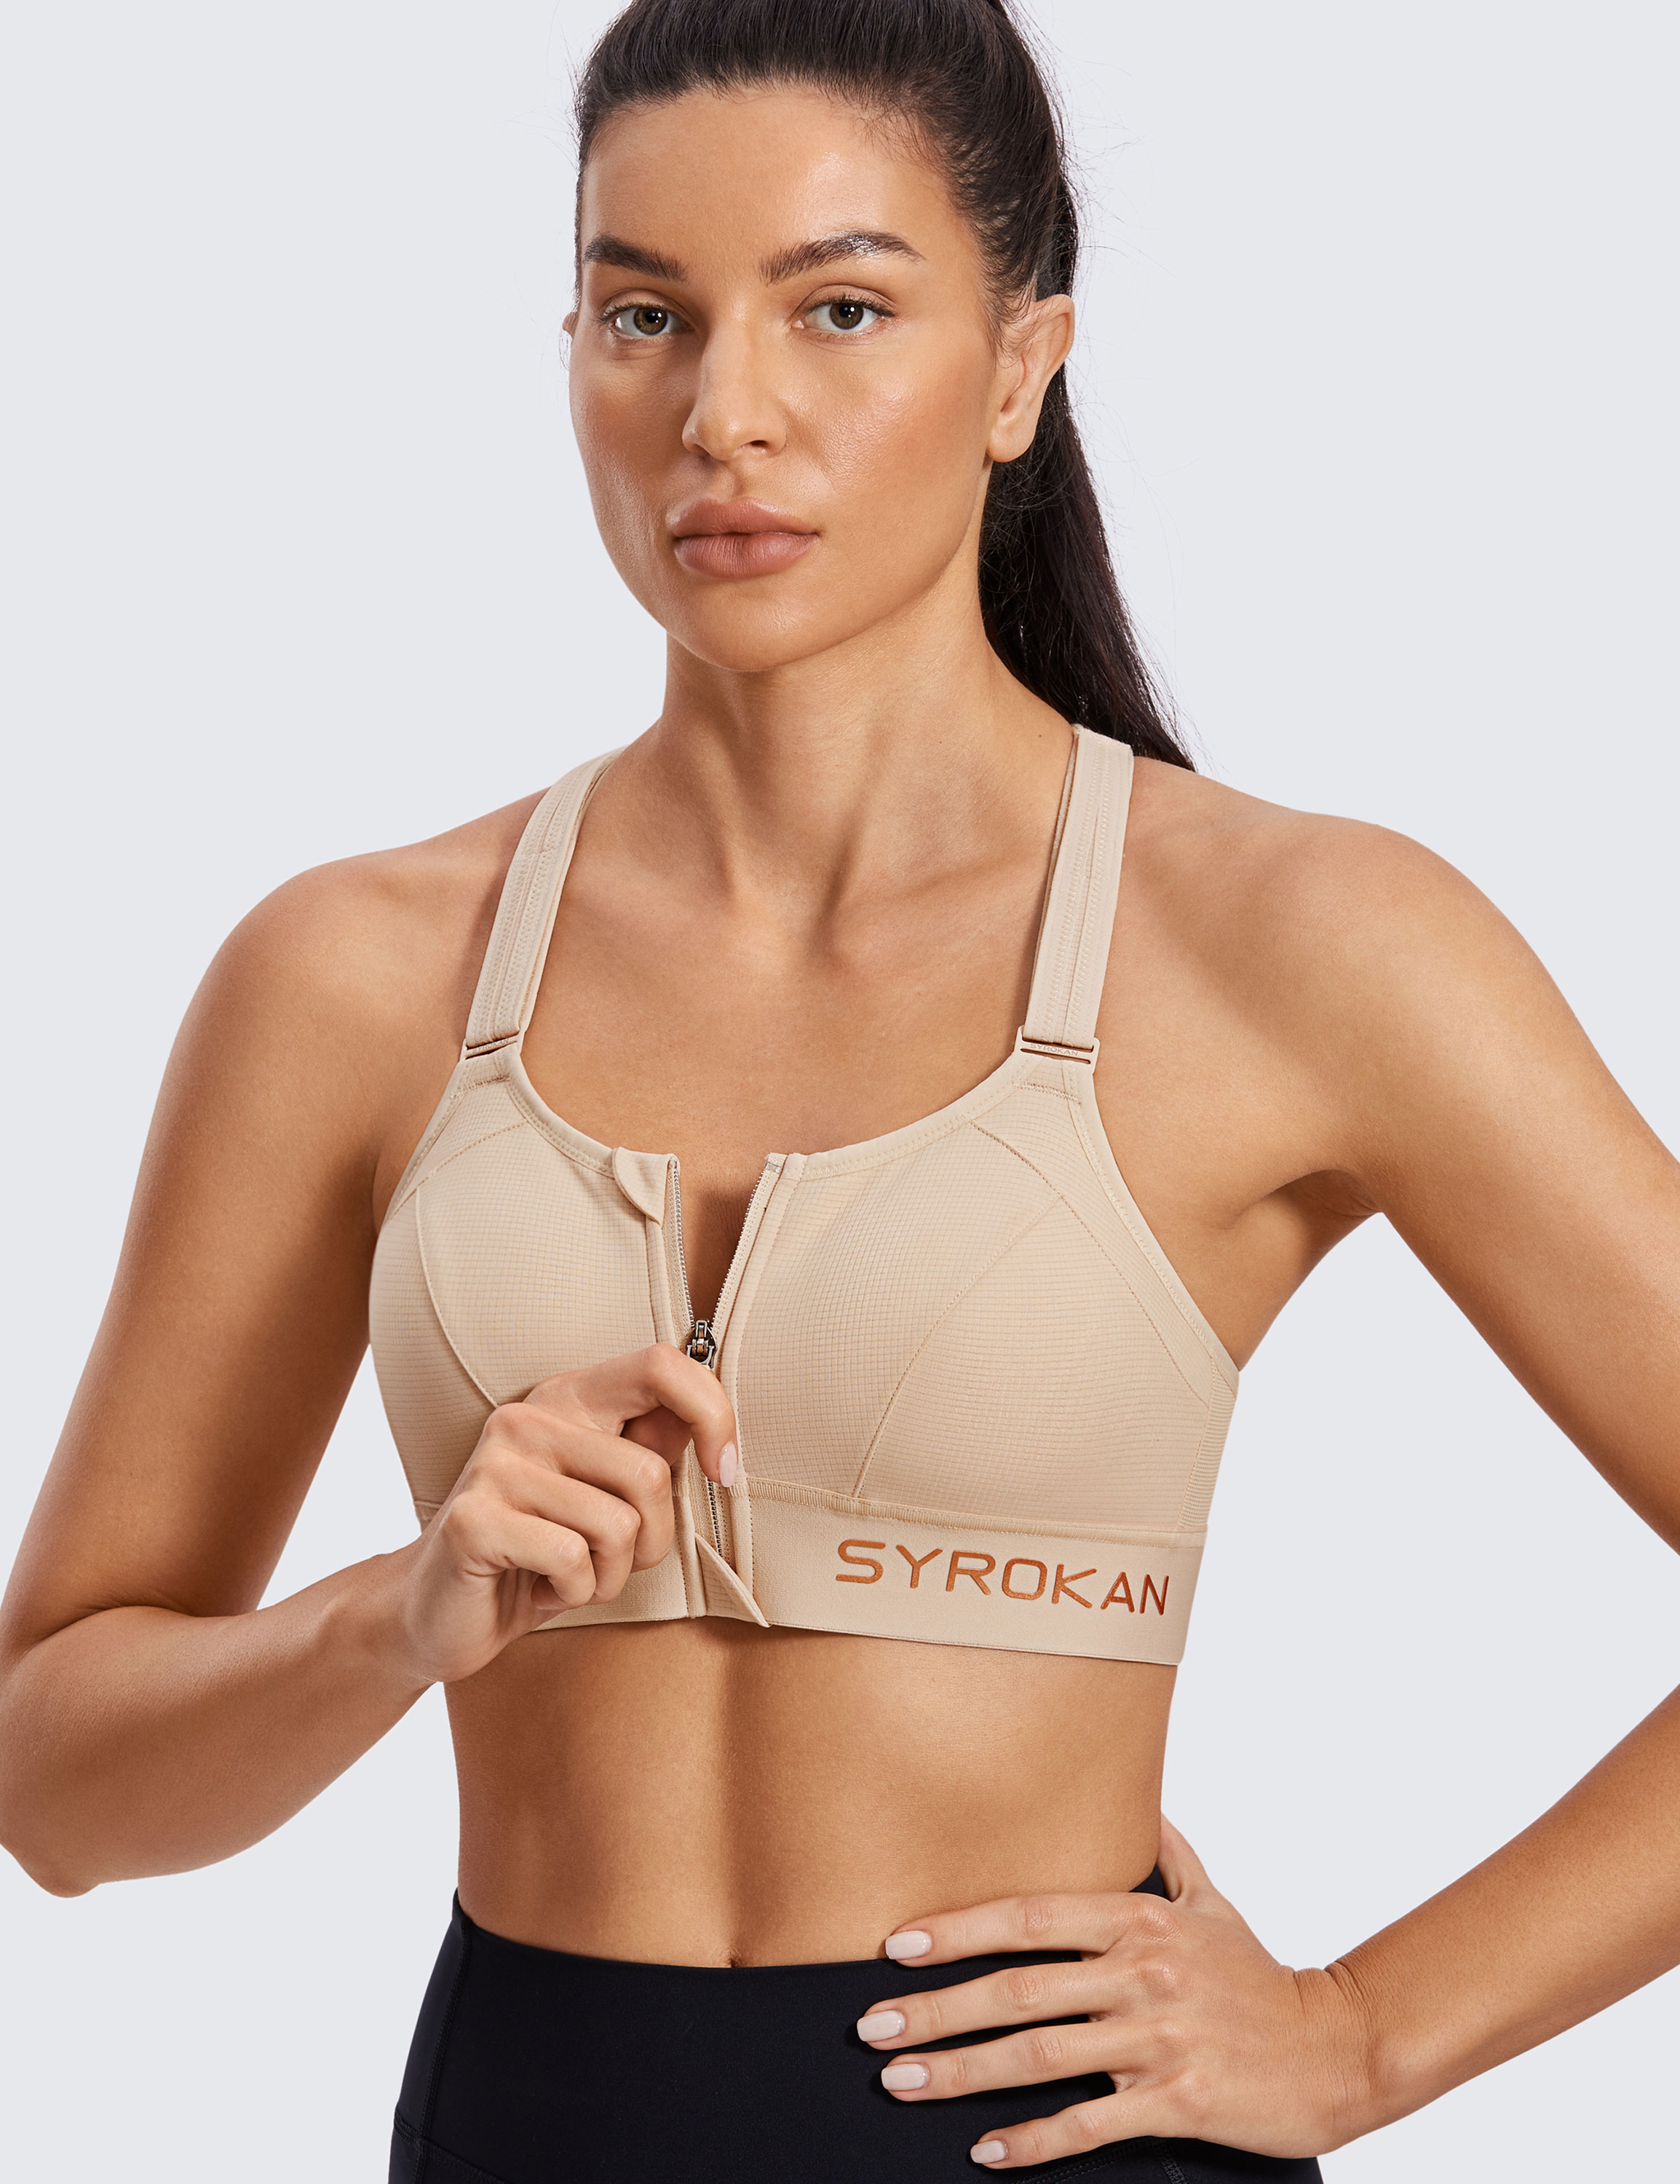 SYROKAN Women Workout Sports Bra High Impact Support Bounce Control  Wirefree Mesh Racerback Top Fitness Running Athletic